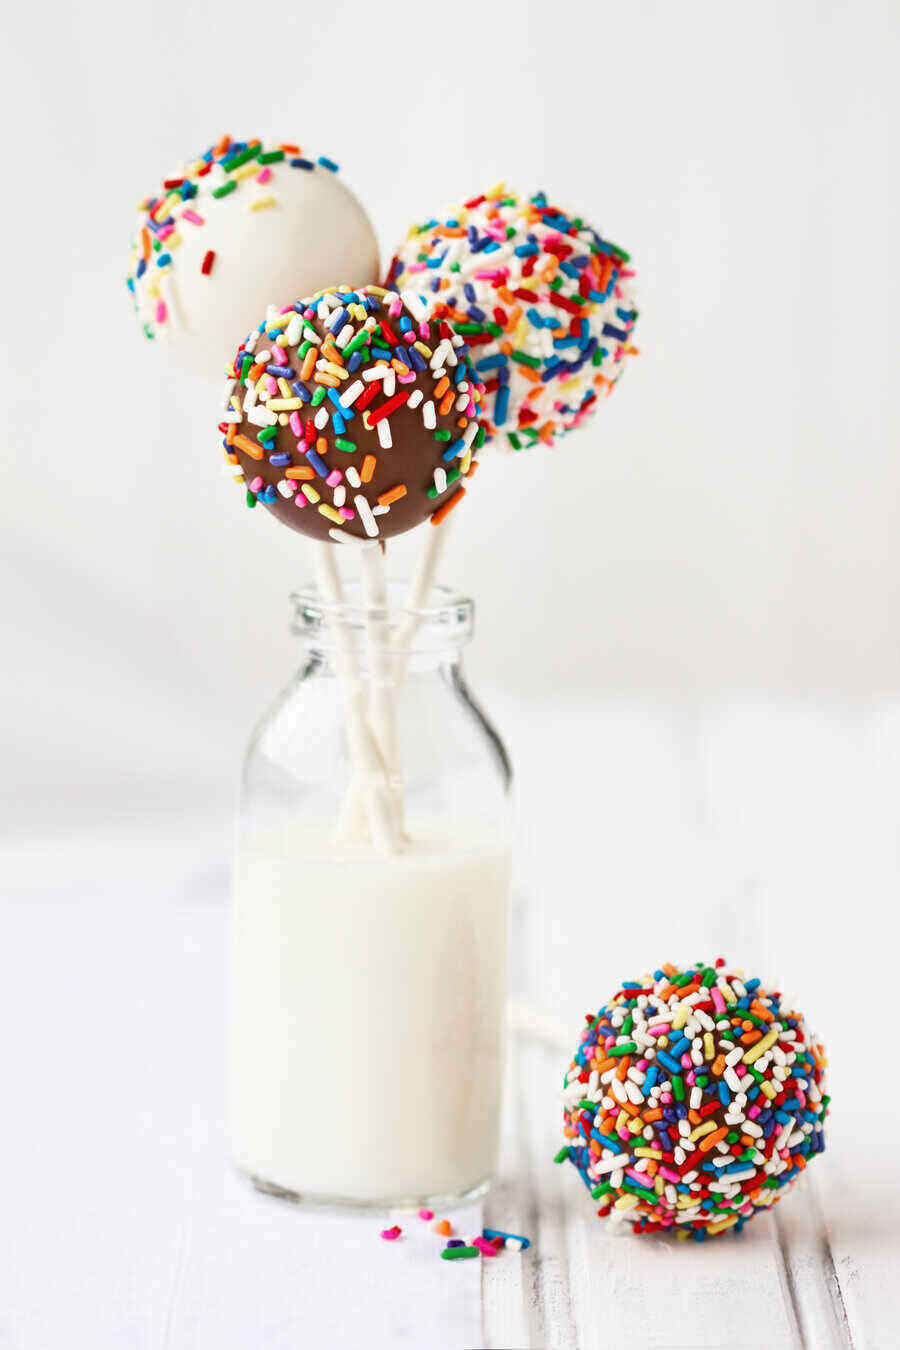 Chocolate covered cake pops decorated with colorful sprinkles